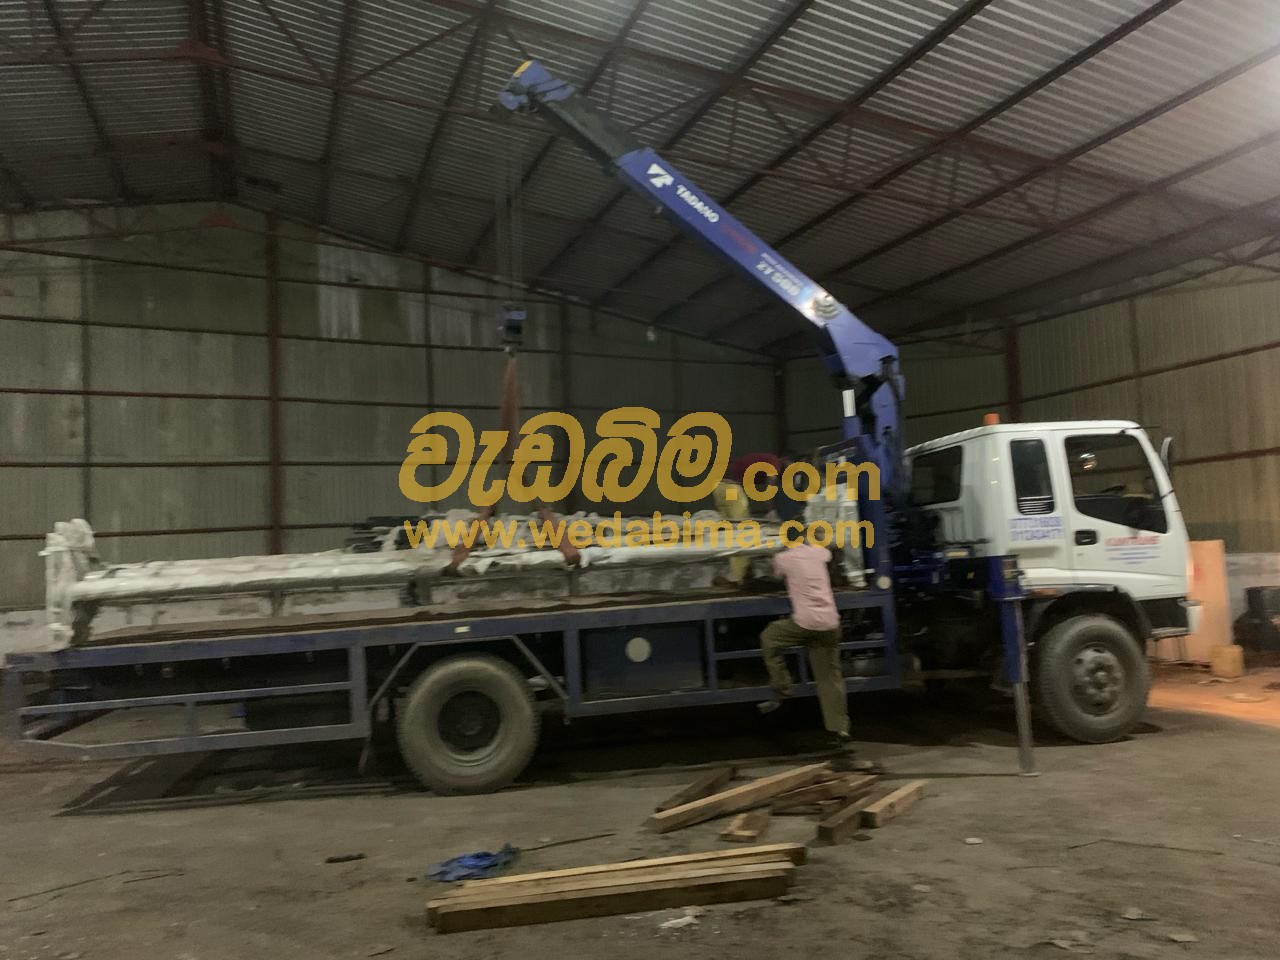 Crane for Hire - Colombo